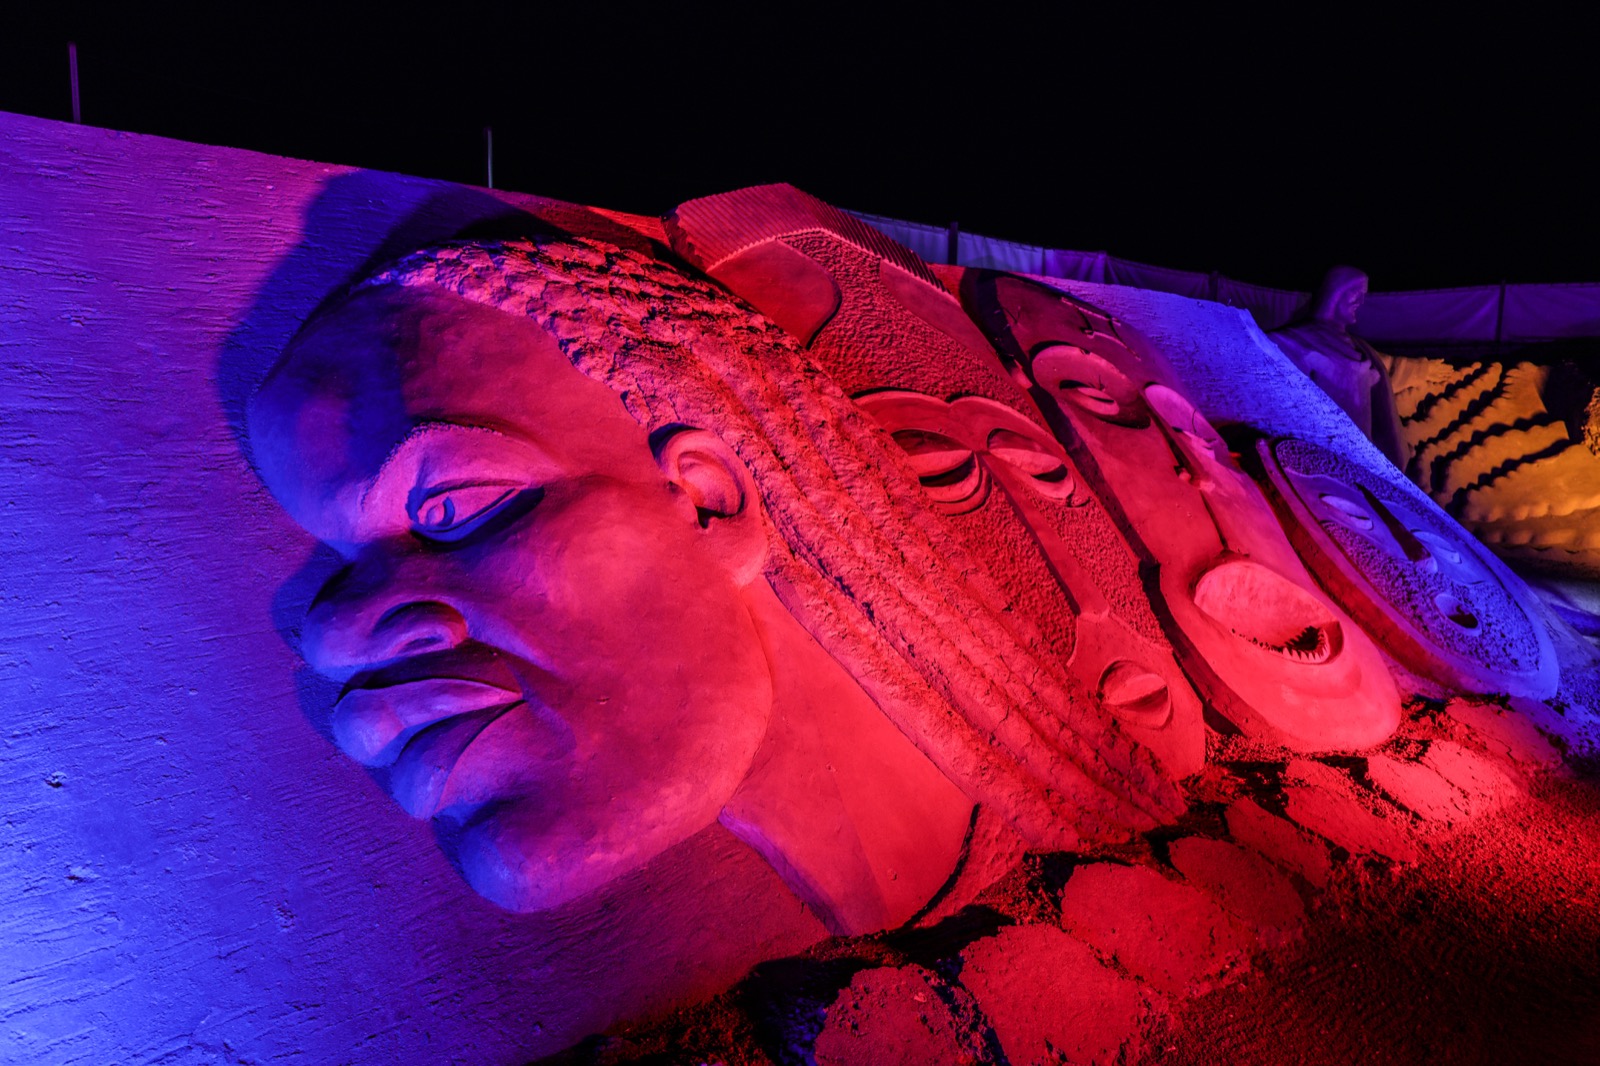 ANTALYA, TURKEY - MAY 02 : A sand sculpture is exhibited during the 11th International Antalya Sand Sculpture Festival in Antalya, Turkey on May 02, 2017. Sand sculptures are being displayed as 20 sculptors from 12 different countries attended to the 11th International Antalya Sand Sculpture Festival, which is among the worlds largest sand sculpture events, with main theme 'the seven wonders of the world and Mythology' in Antalya. 10000 tones of sand used to build gigantic sculptures such as Mustafa Kemal Ataturk, Christ the redeemer, Machu Picchu, Chichen Itza, Petra and Taj mahal, Colosseum and great wall of China. (Photo by Ali Ihsan Ozturk/Anadolu Agency/Getty Images)